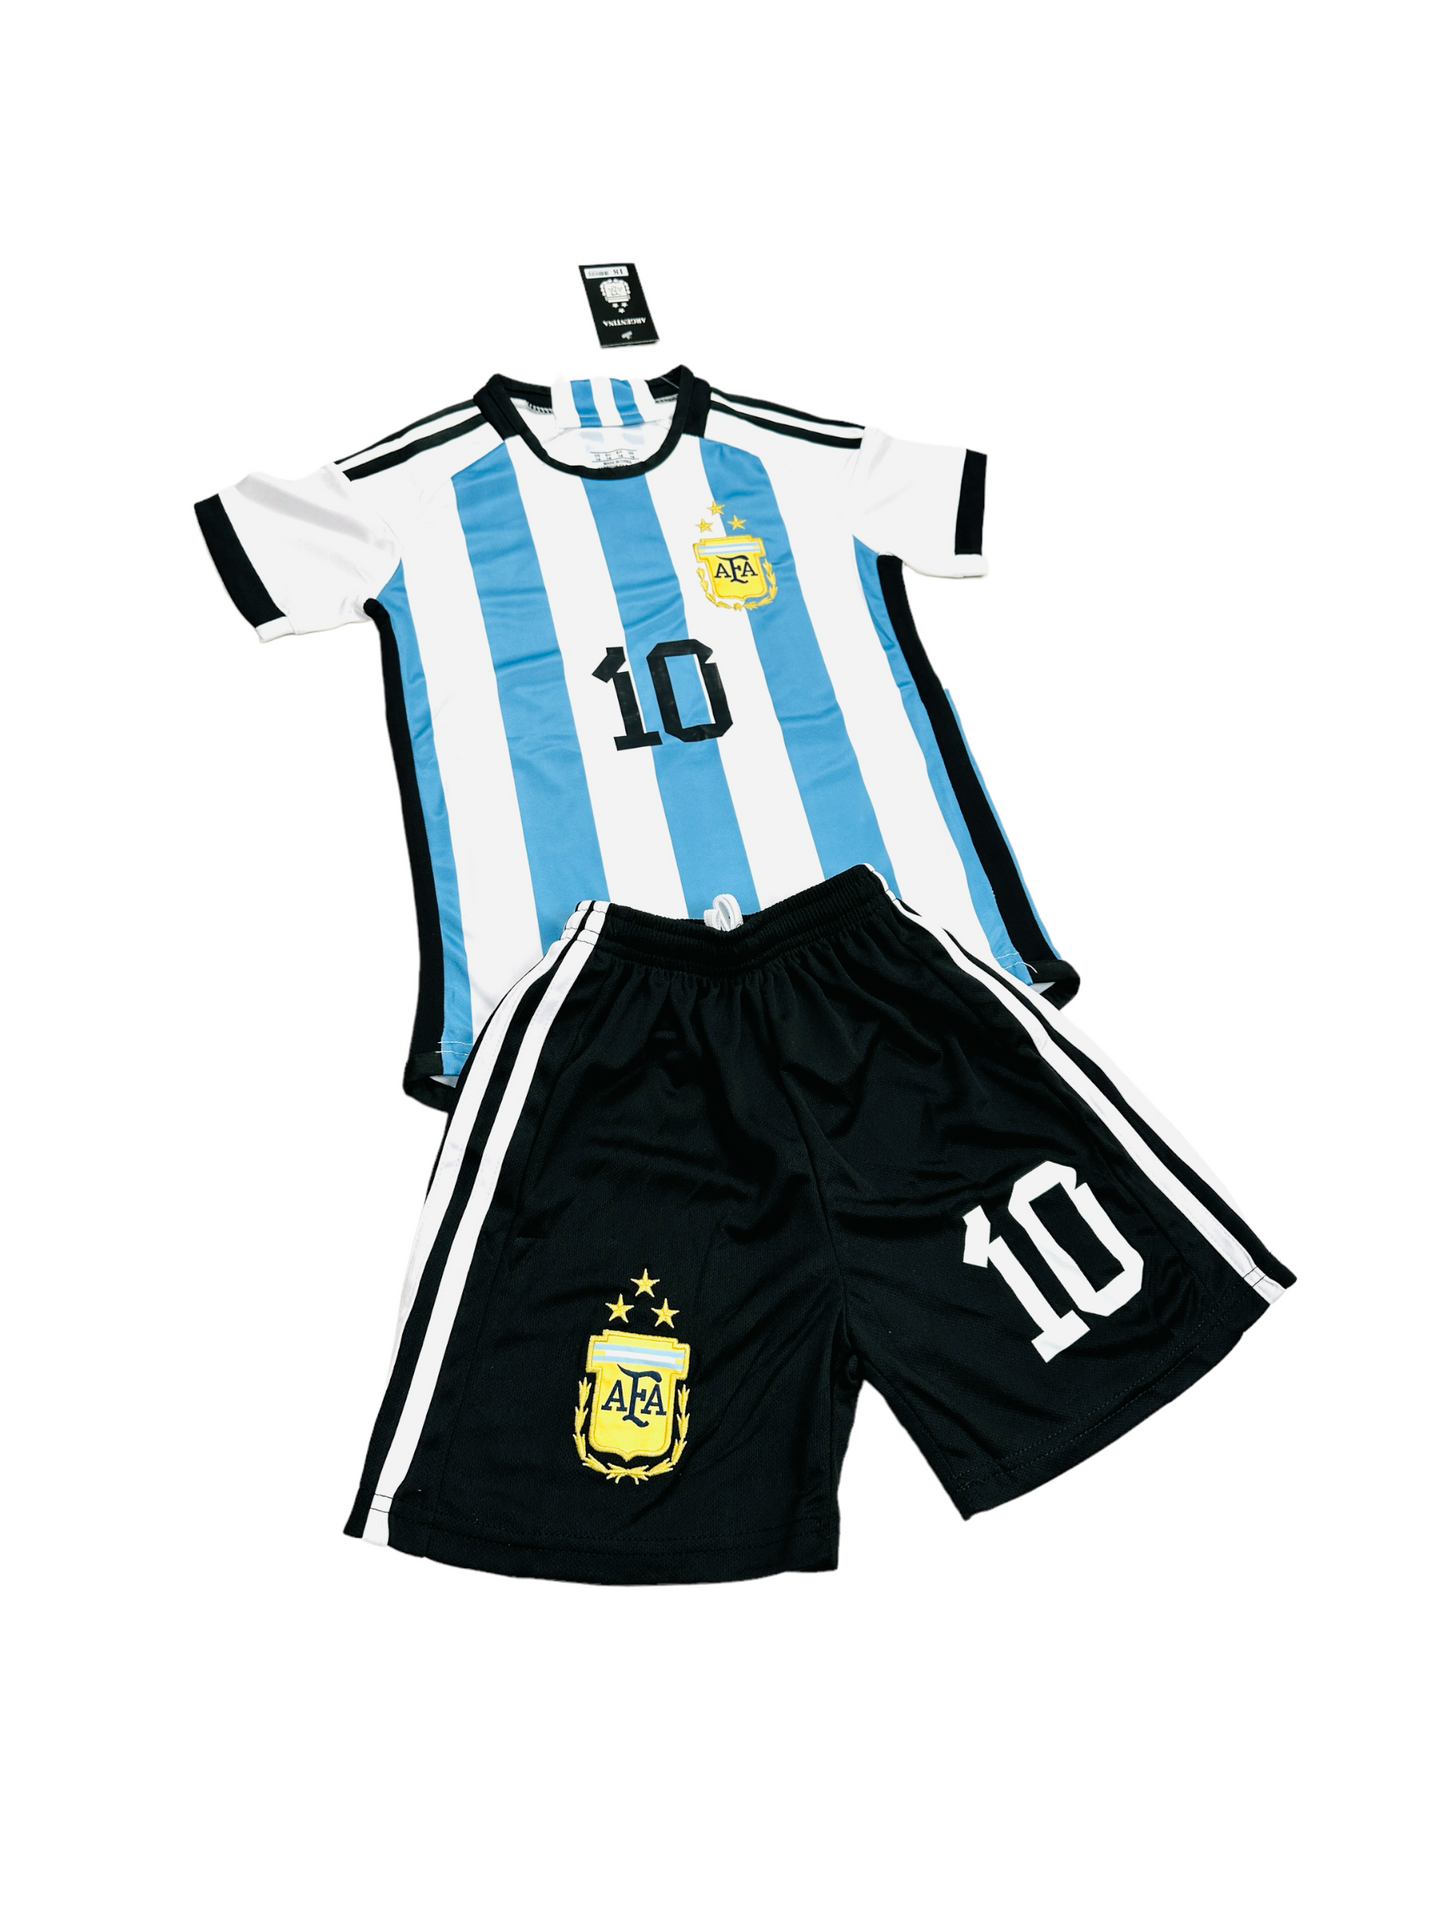 Messi #10 Argentina Home Youth soccer set